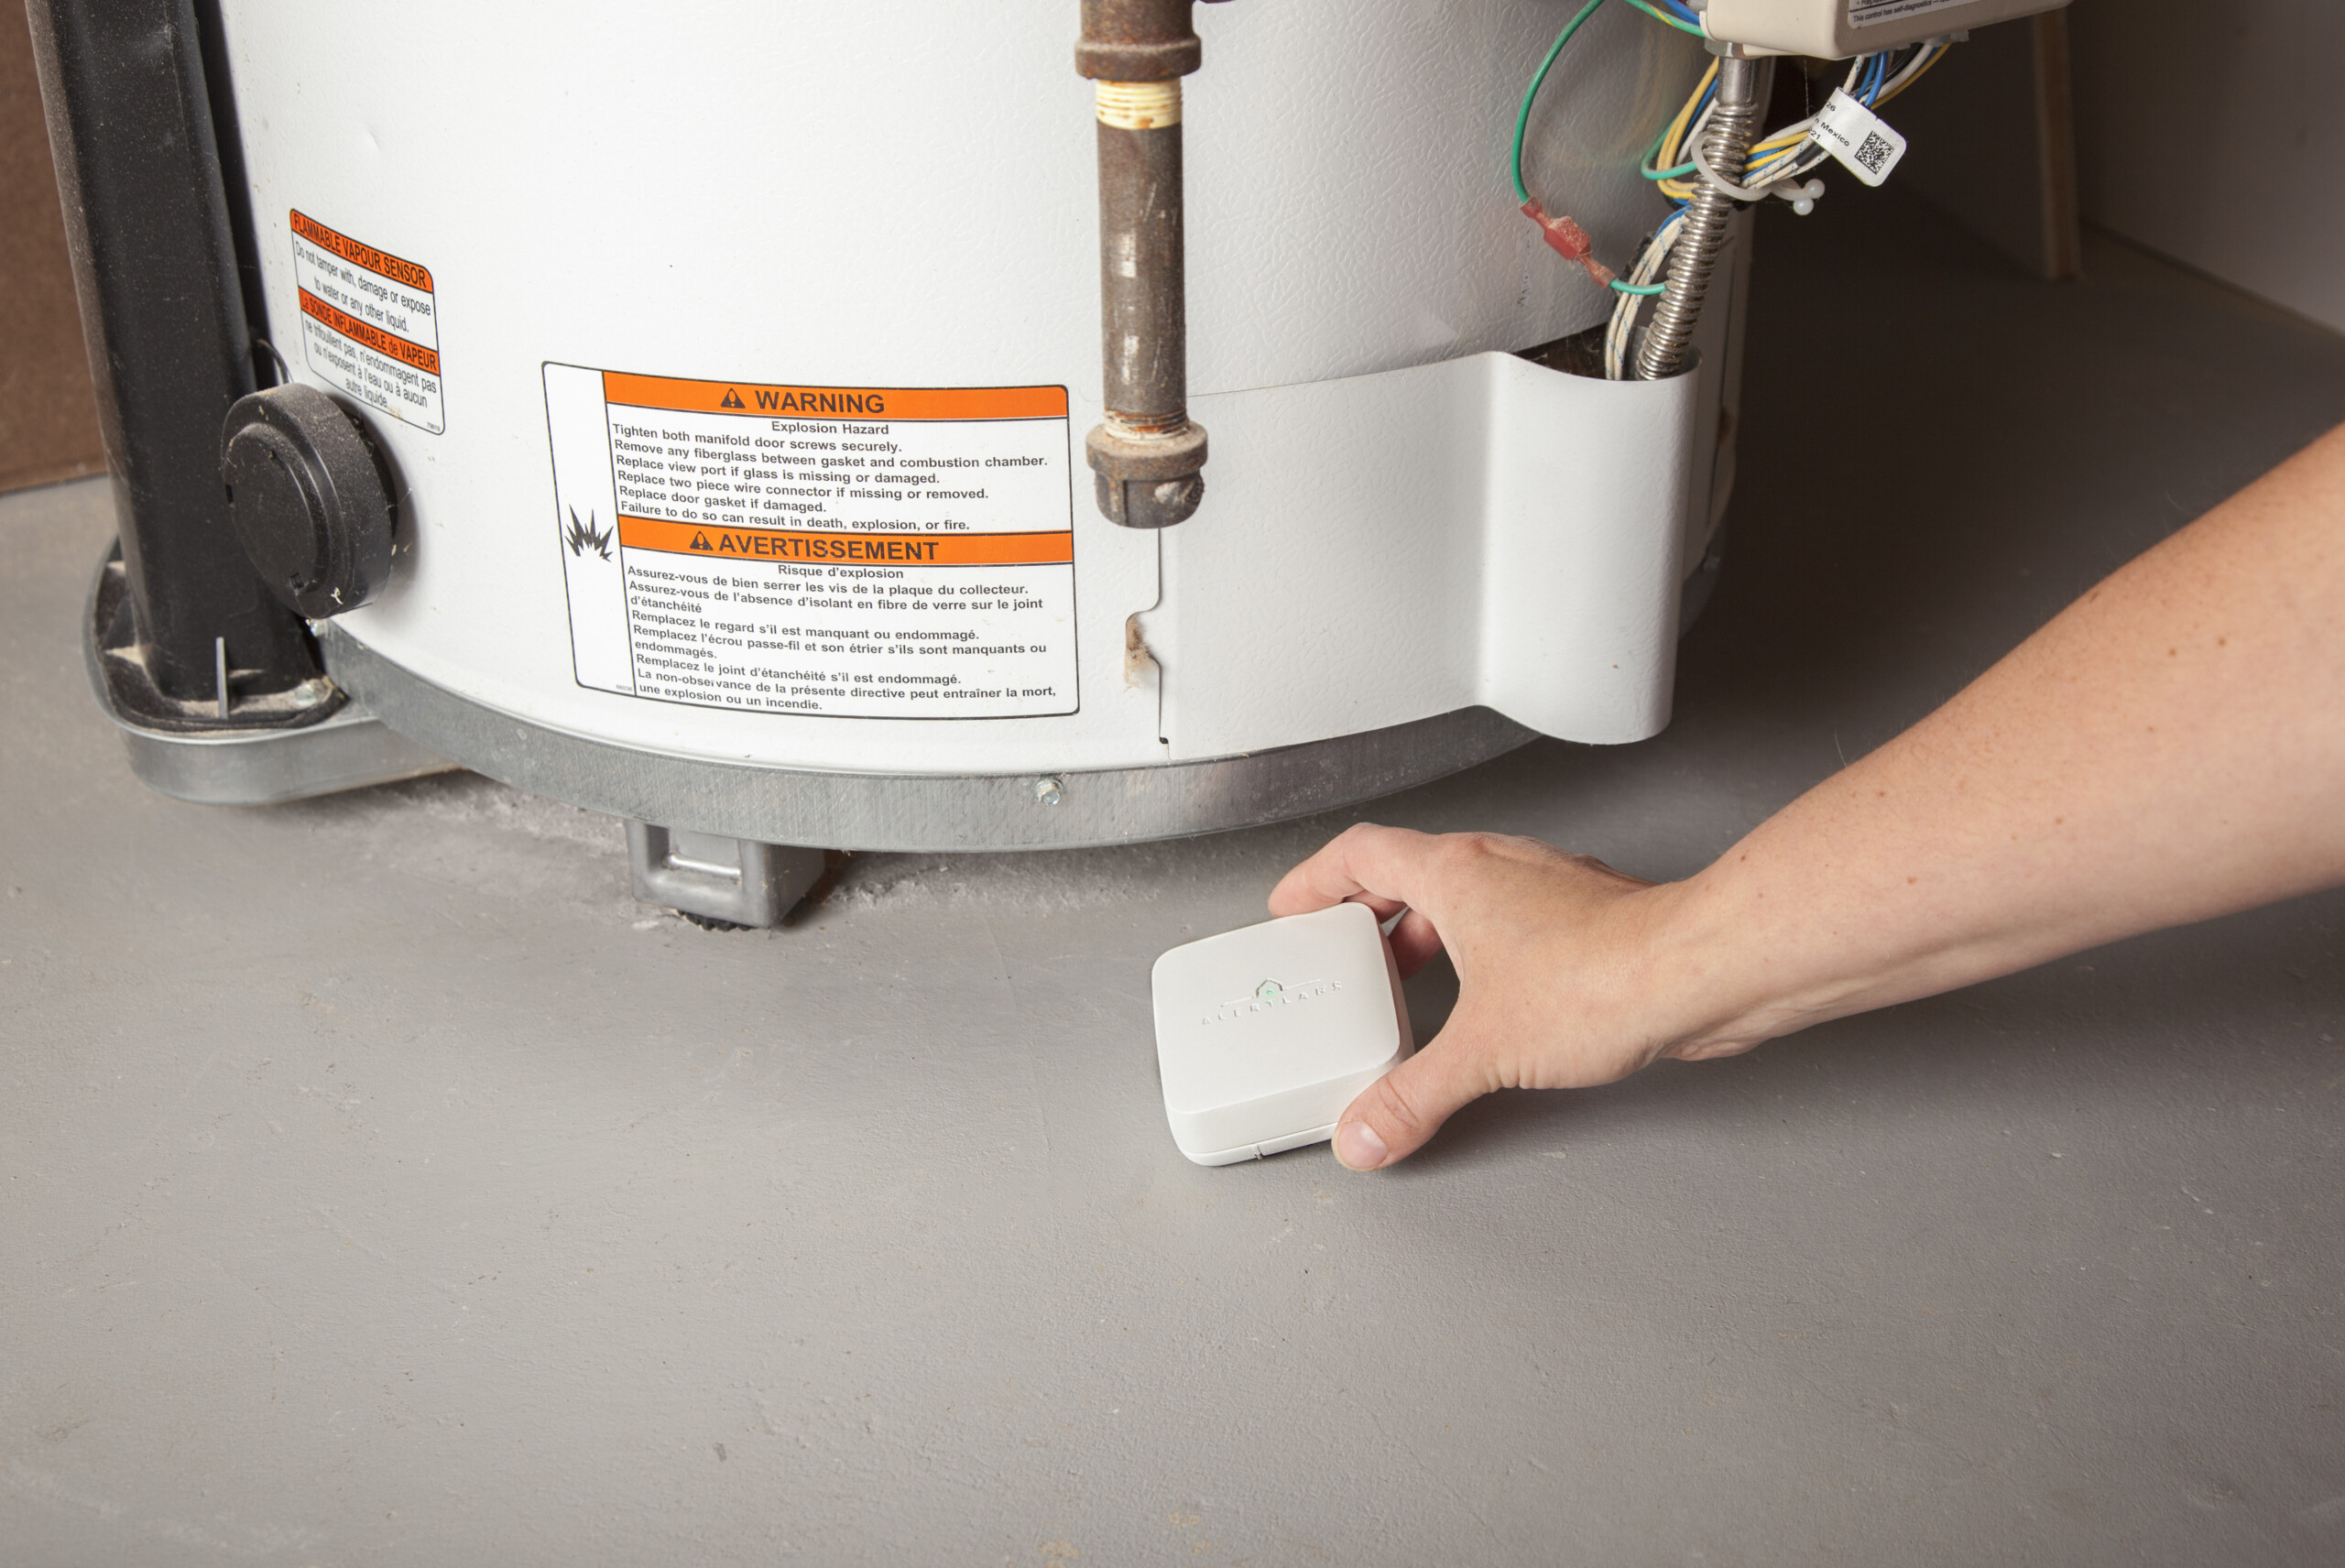 Installing a water monitoring sensor next to a water heater